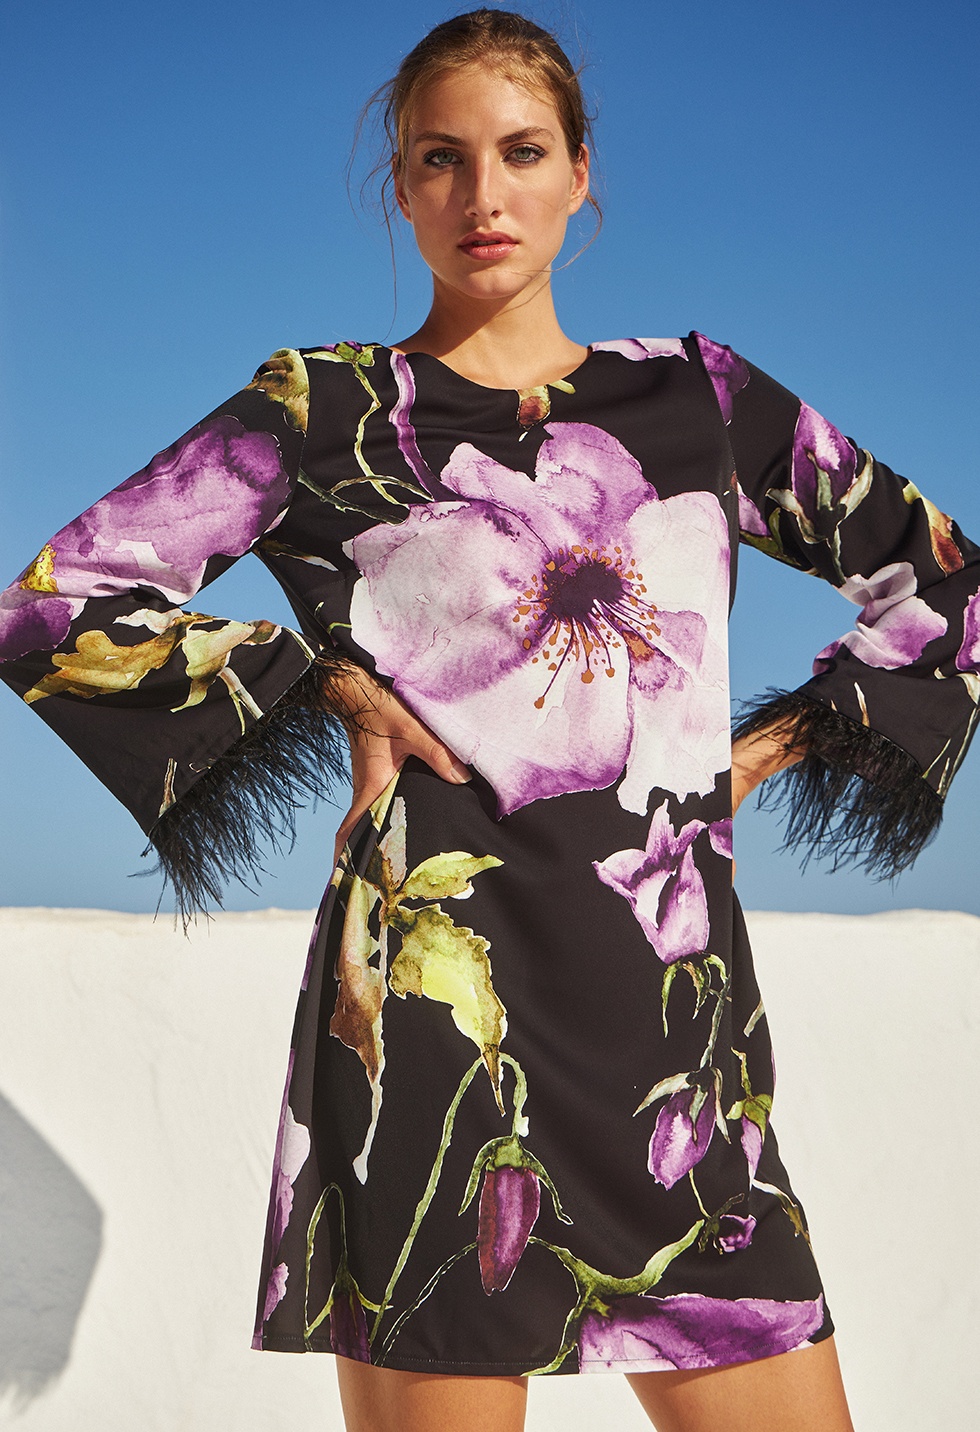 Printed dress with feathers on the sleeves